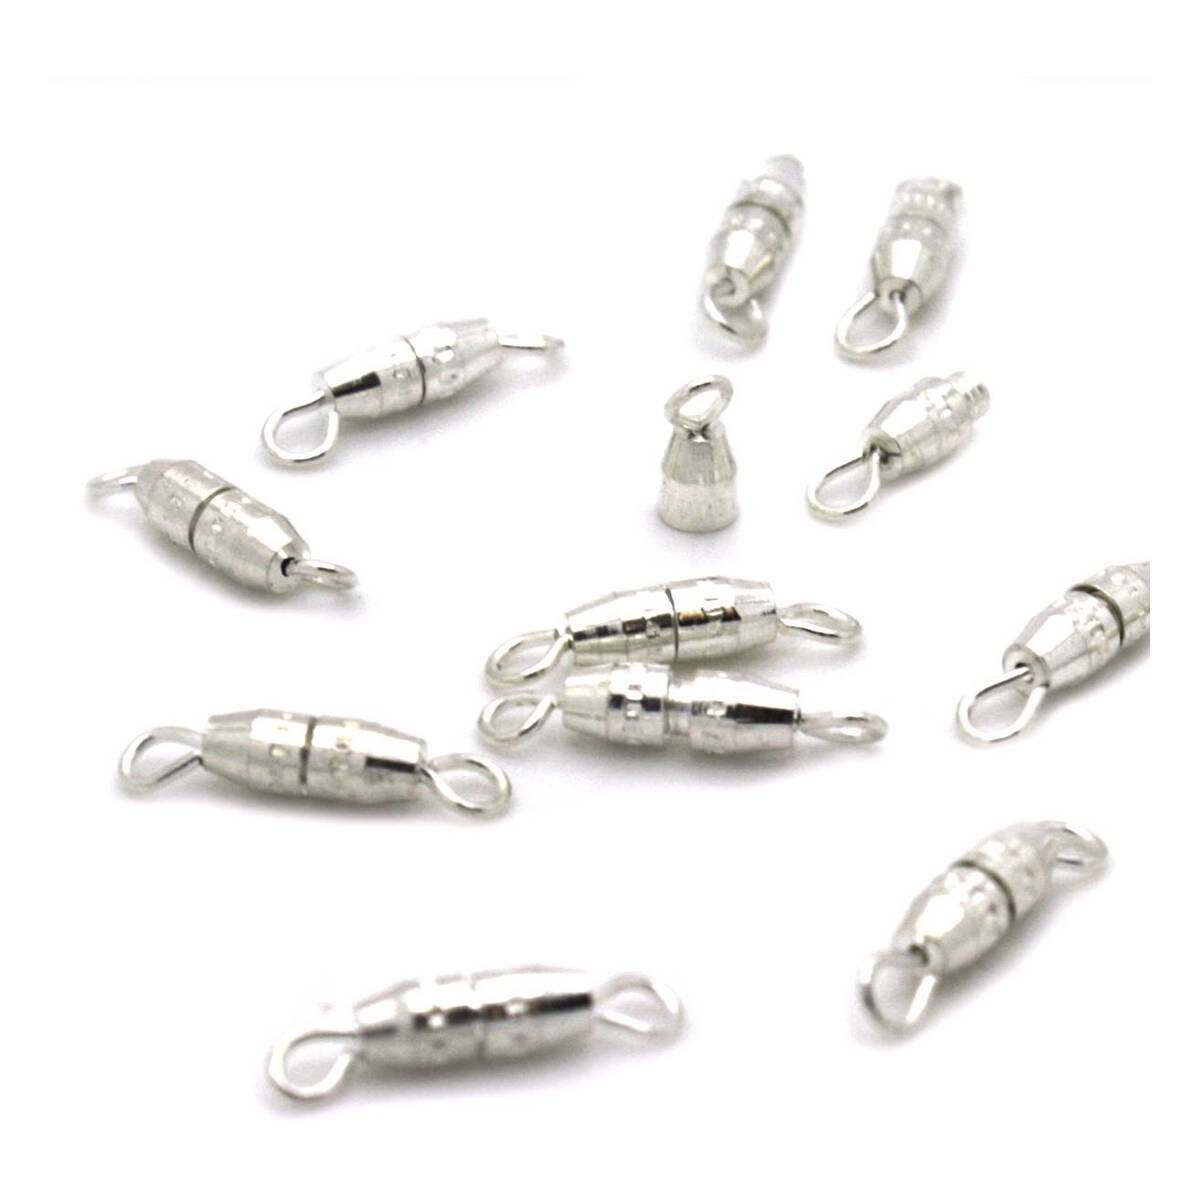 561403 1000 1 beads unlimited silver clasp finding 13mm x 5mm 25 pack